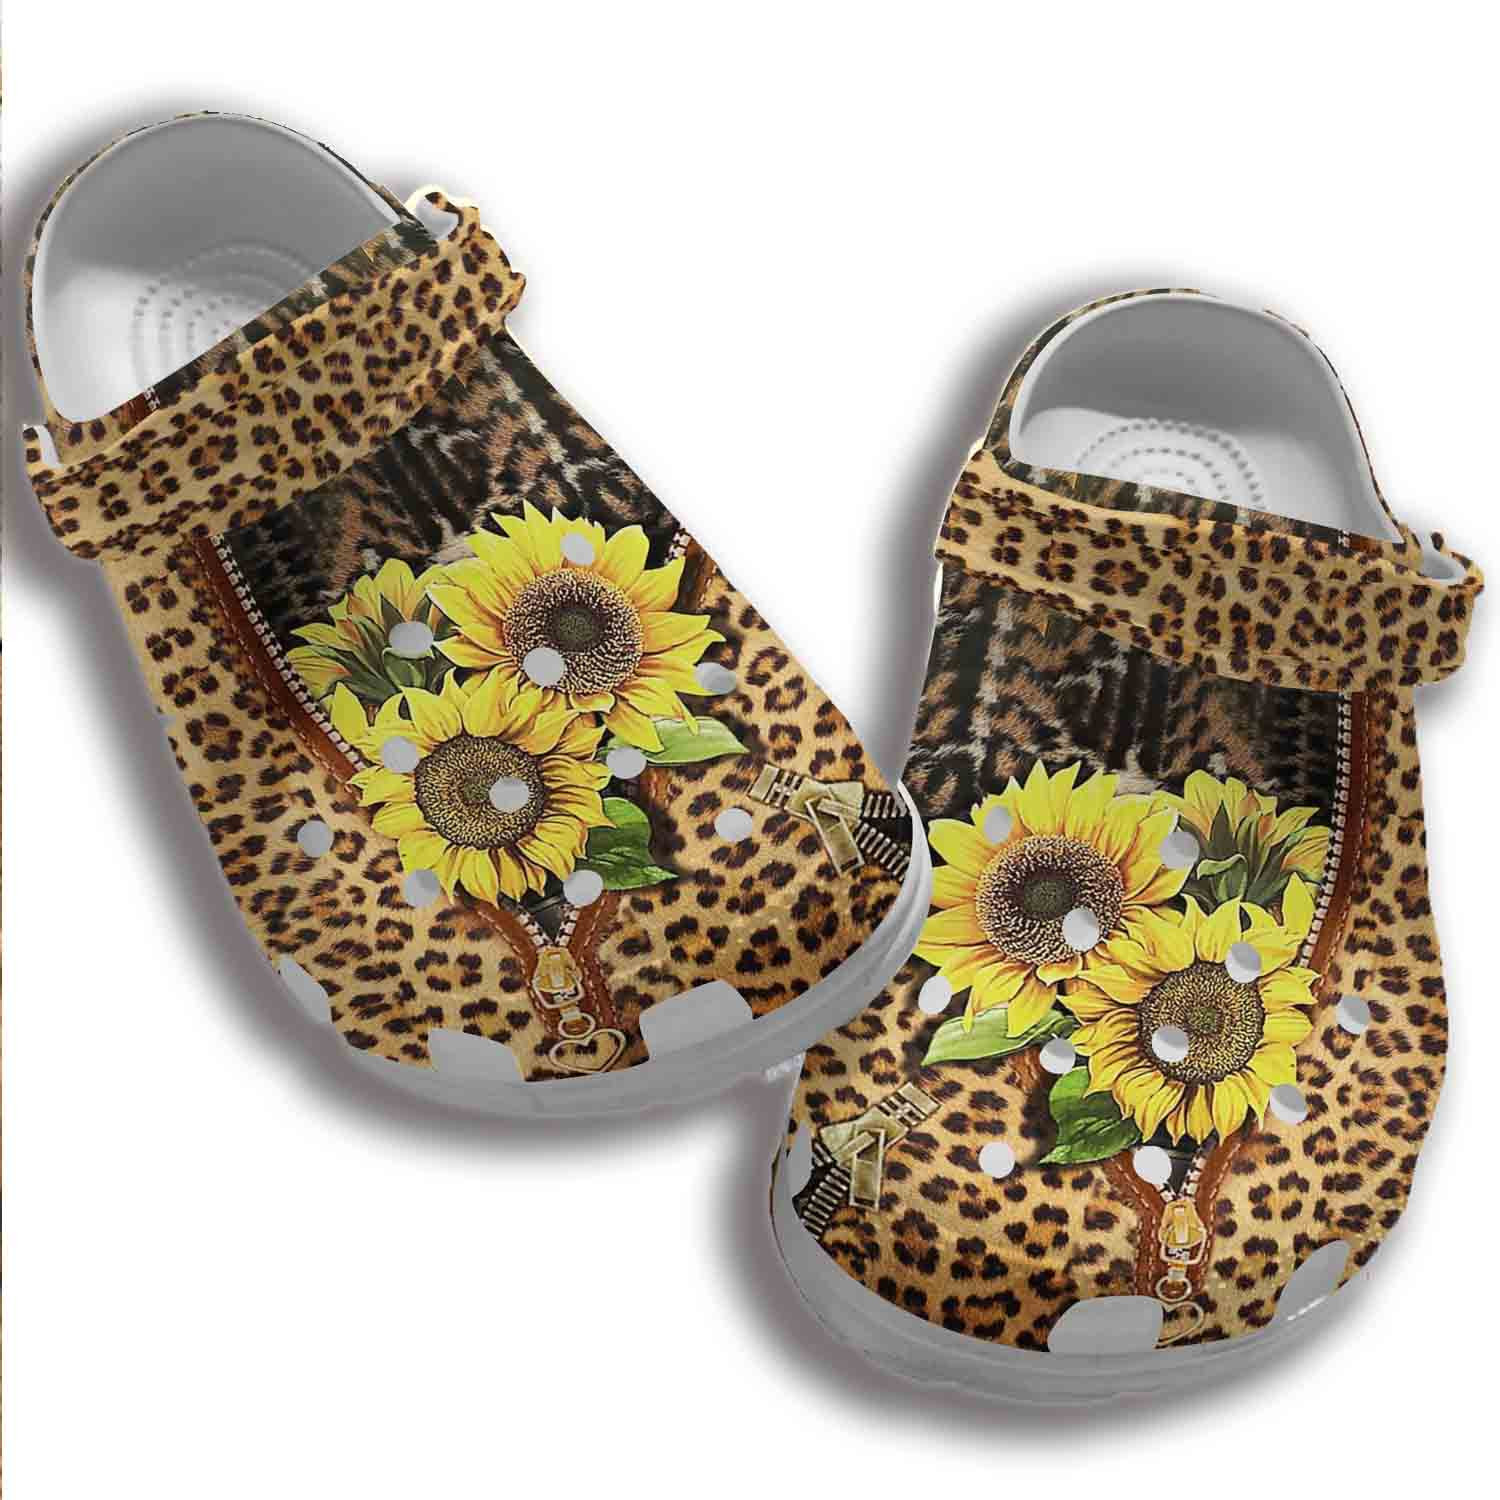 Animal Skin Sunflower Crocs Clog Shoes Women - Cheetah Sunflower Crocs Clog Shoes Custom Shoe Gifts For Mother Day